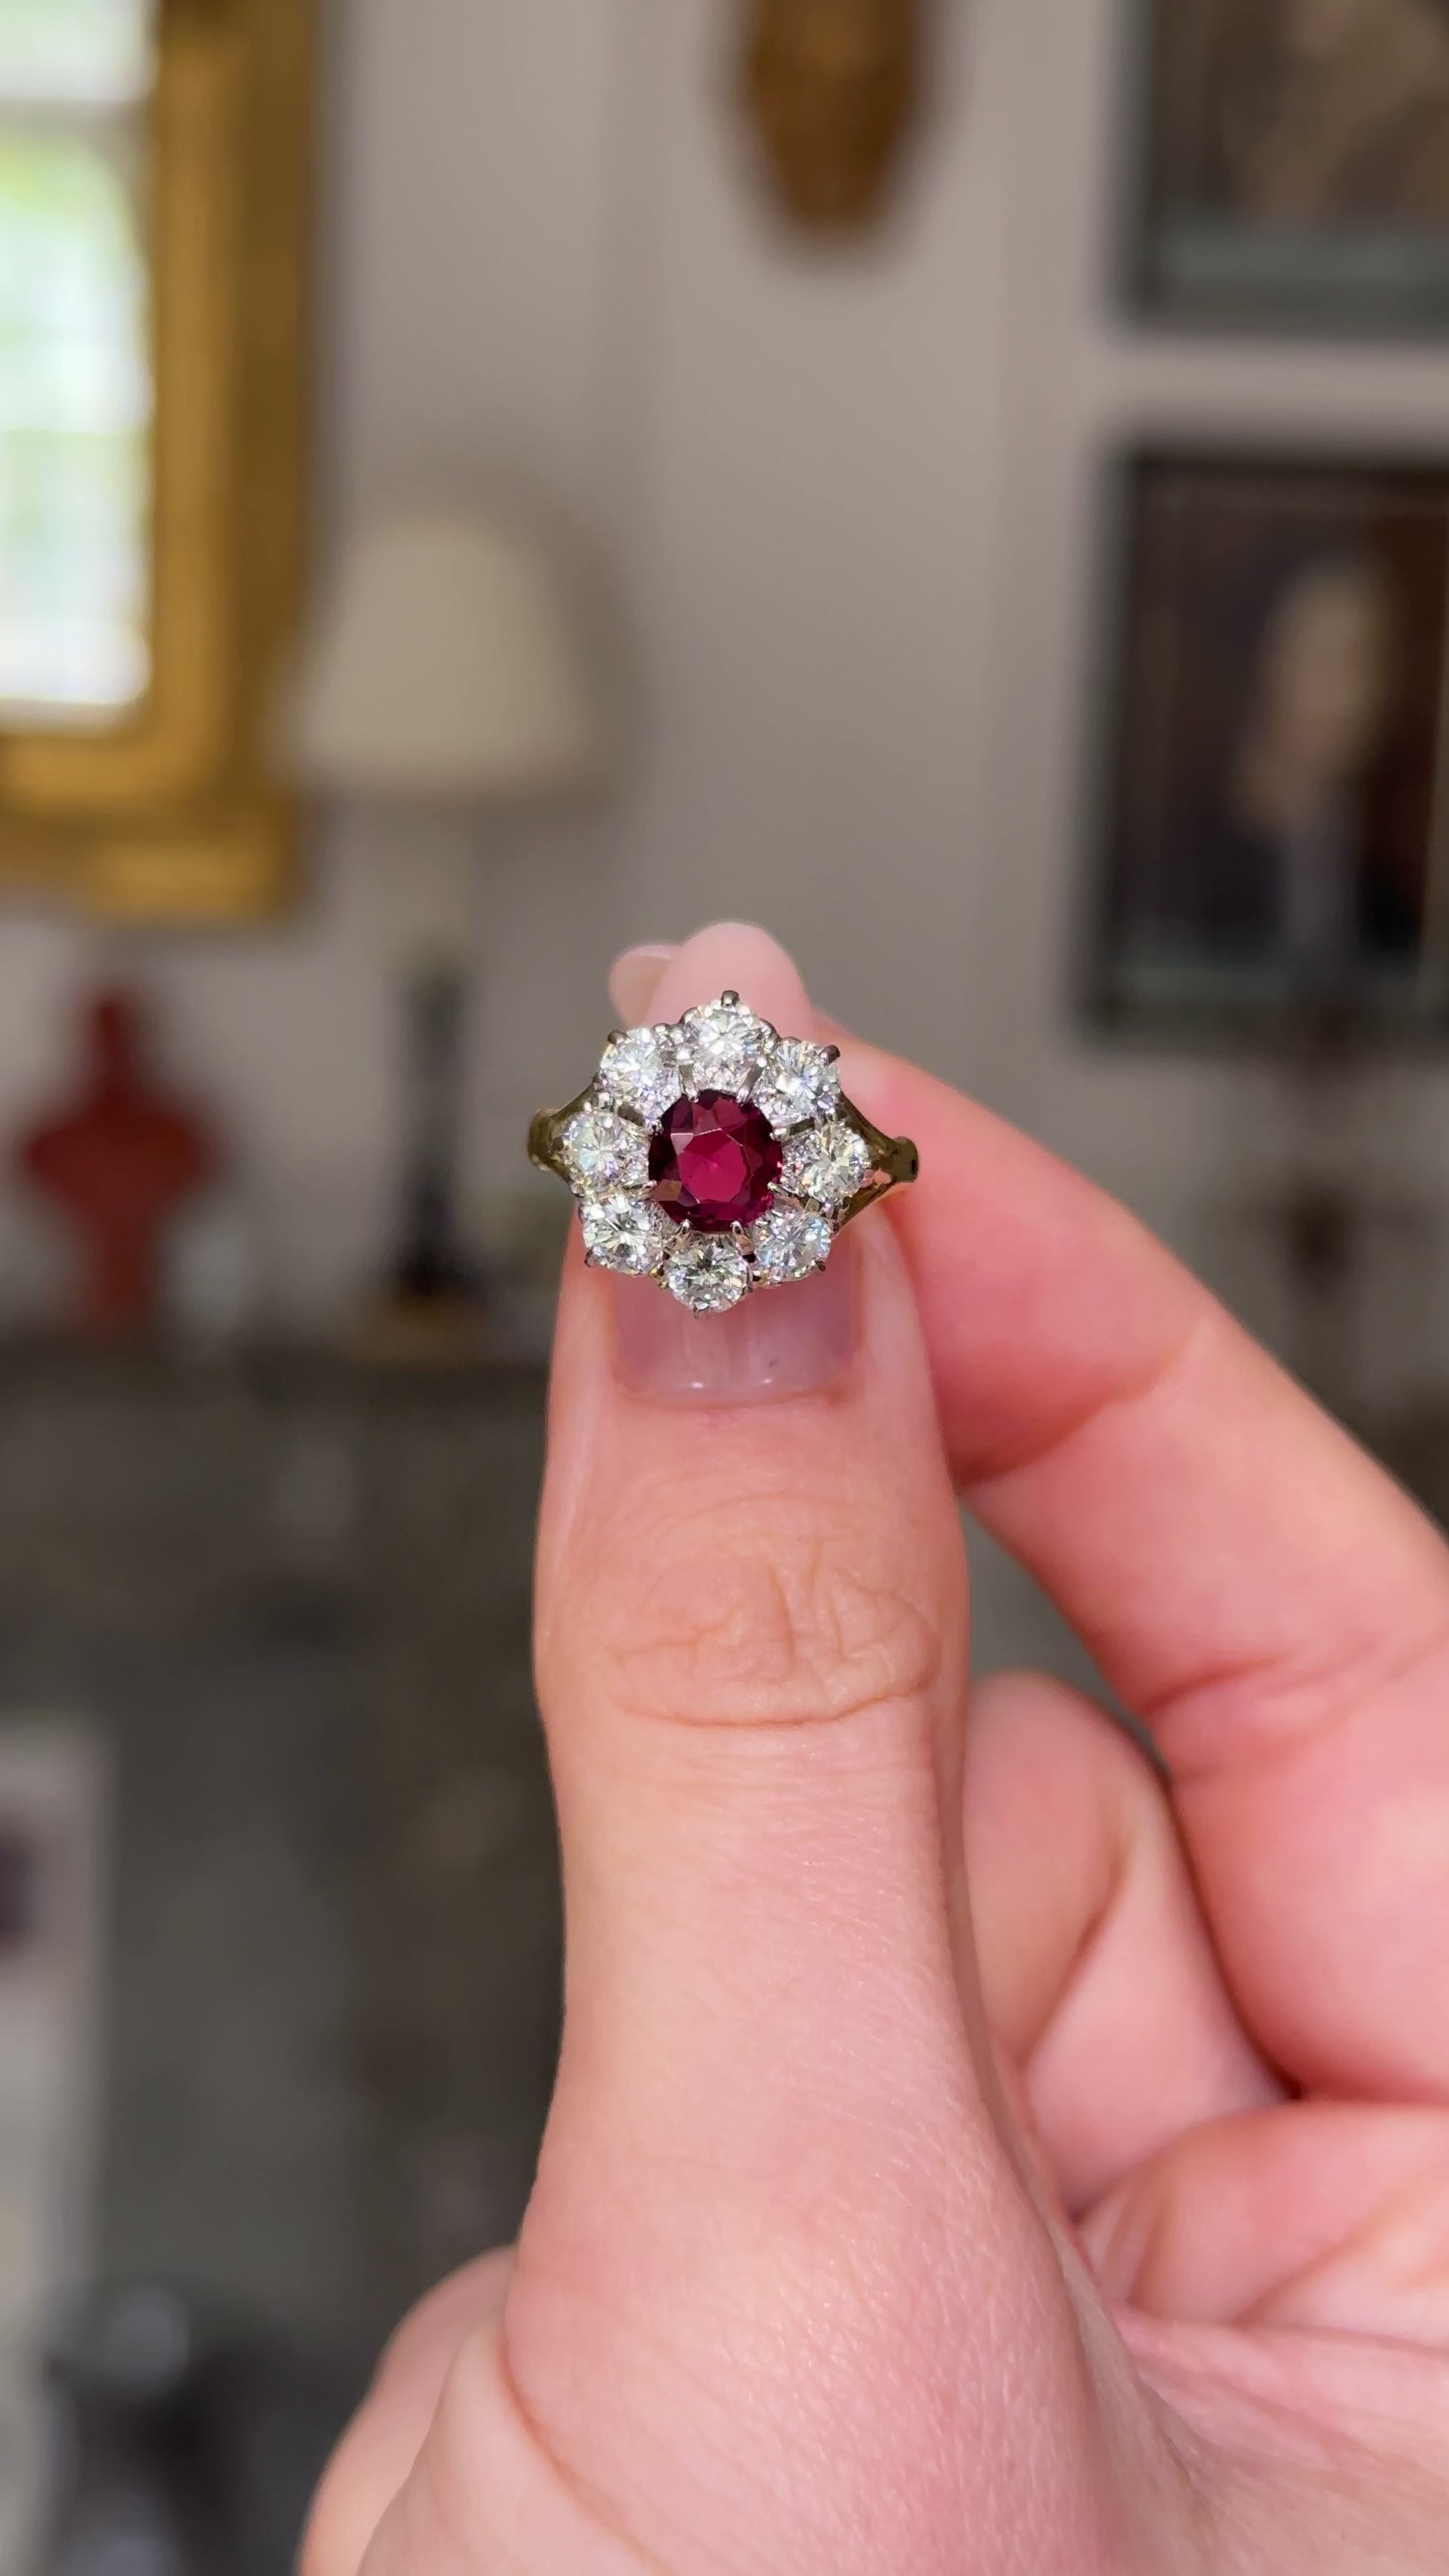 Vintage Style Art Deco Ruby Ring or Engagement with Diamonds - Rare Earth  Jewelry